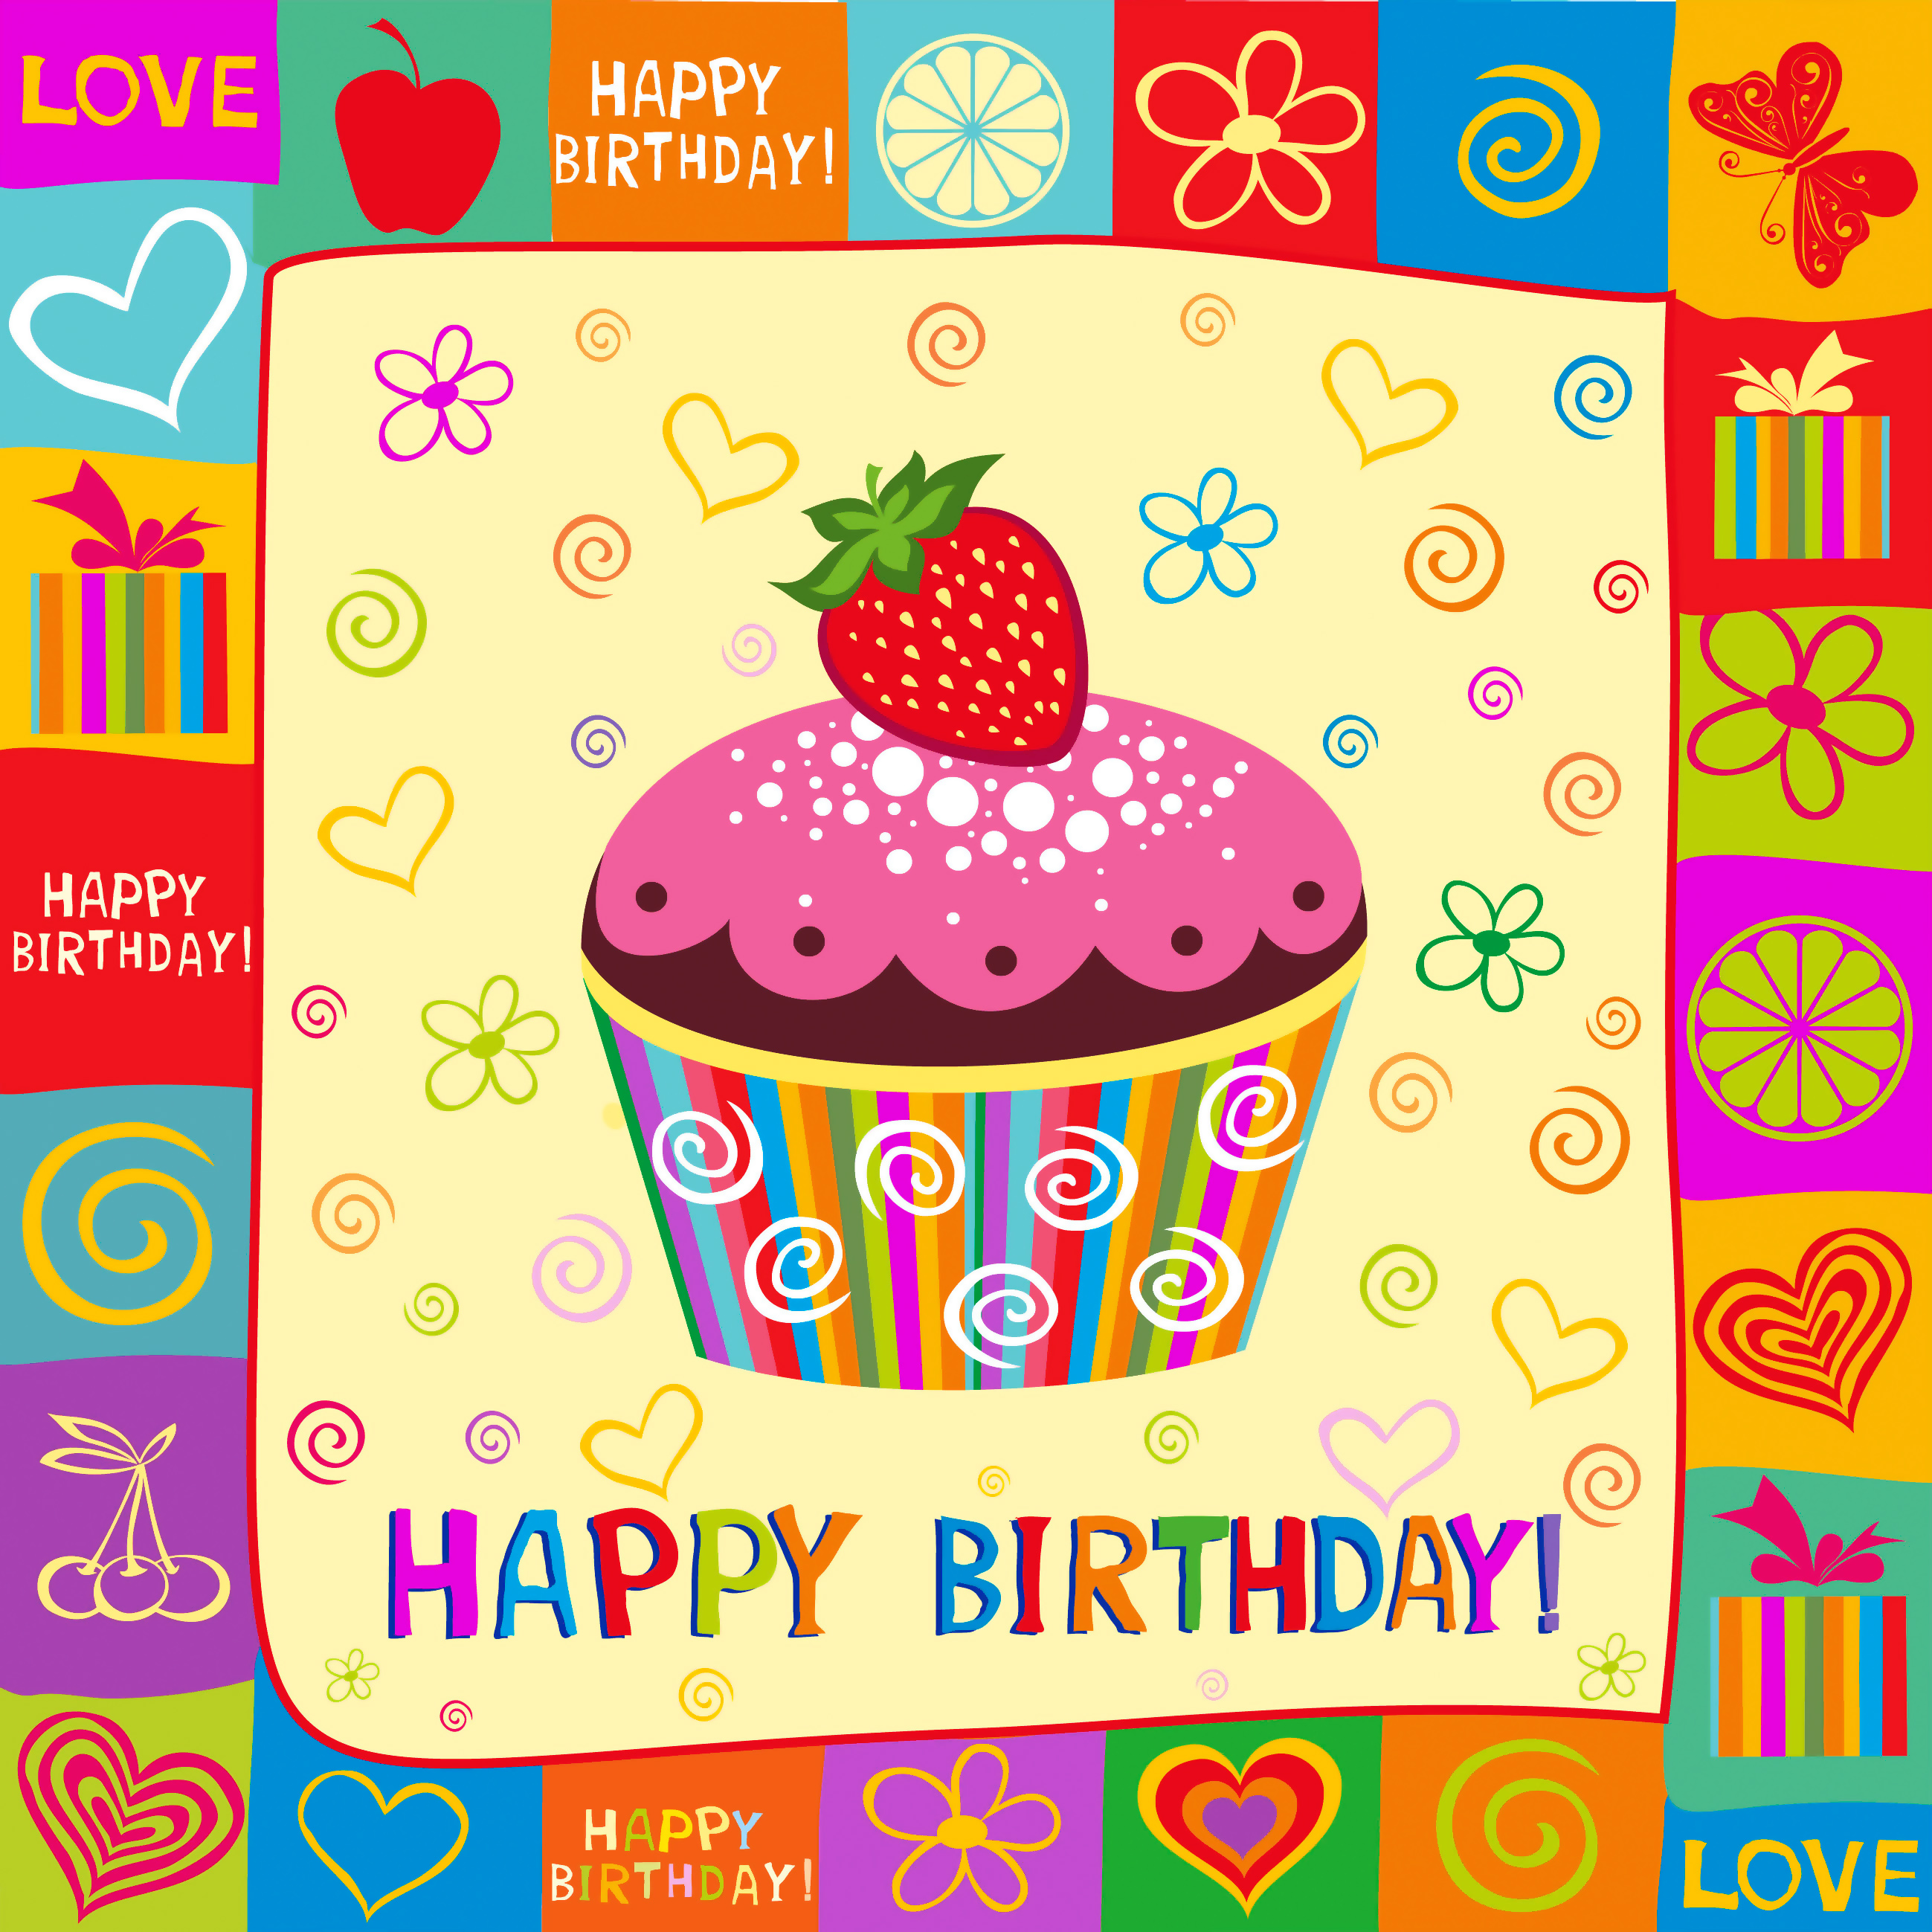 Cute Happy Birthday Wallpaper Gallery Yopriceville High Quality Free Images And Transparent Png Clipart